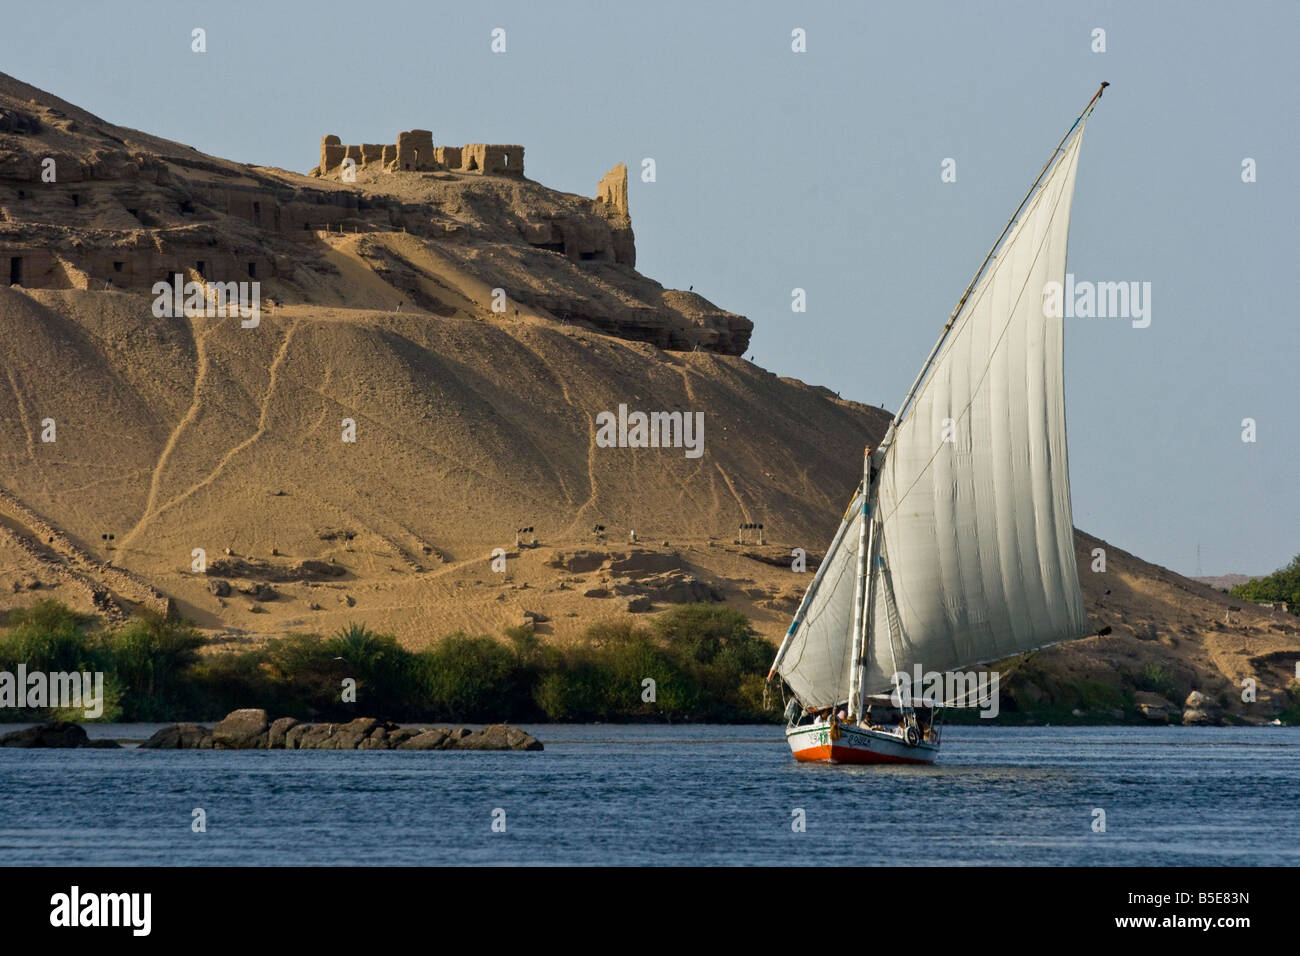 Felucca Sailboat on the Nile River in front of Gharbi Aswan or West Aswan Egypt Stock Photo